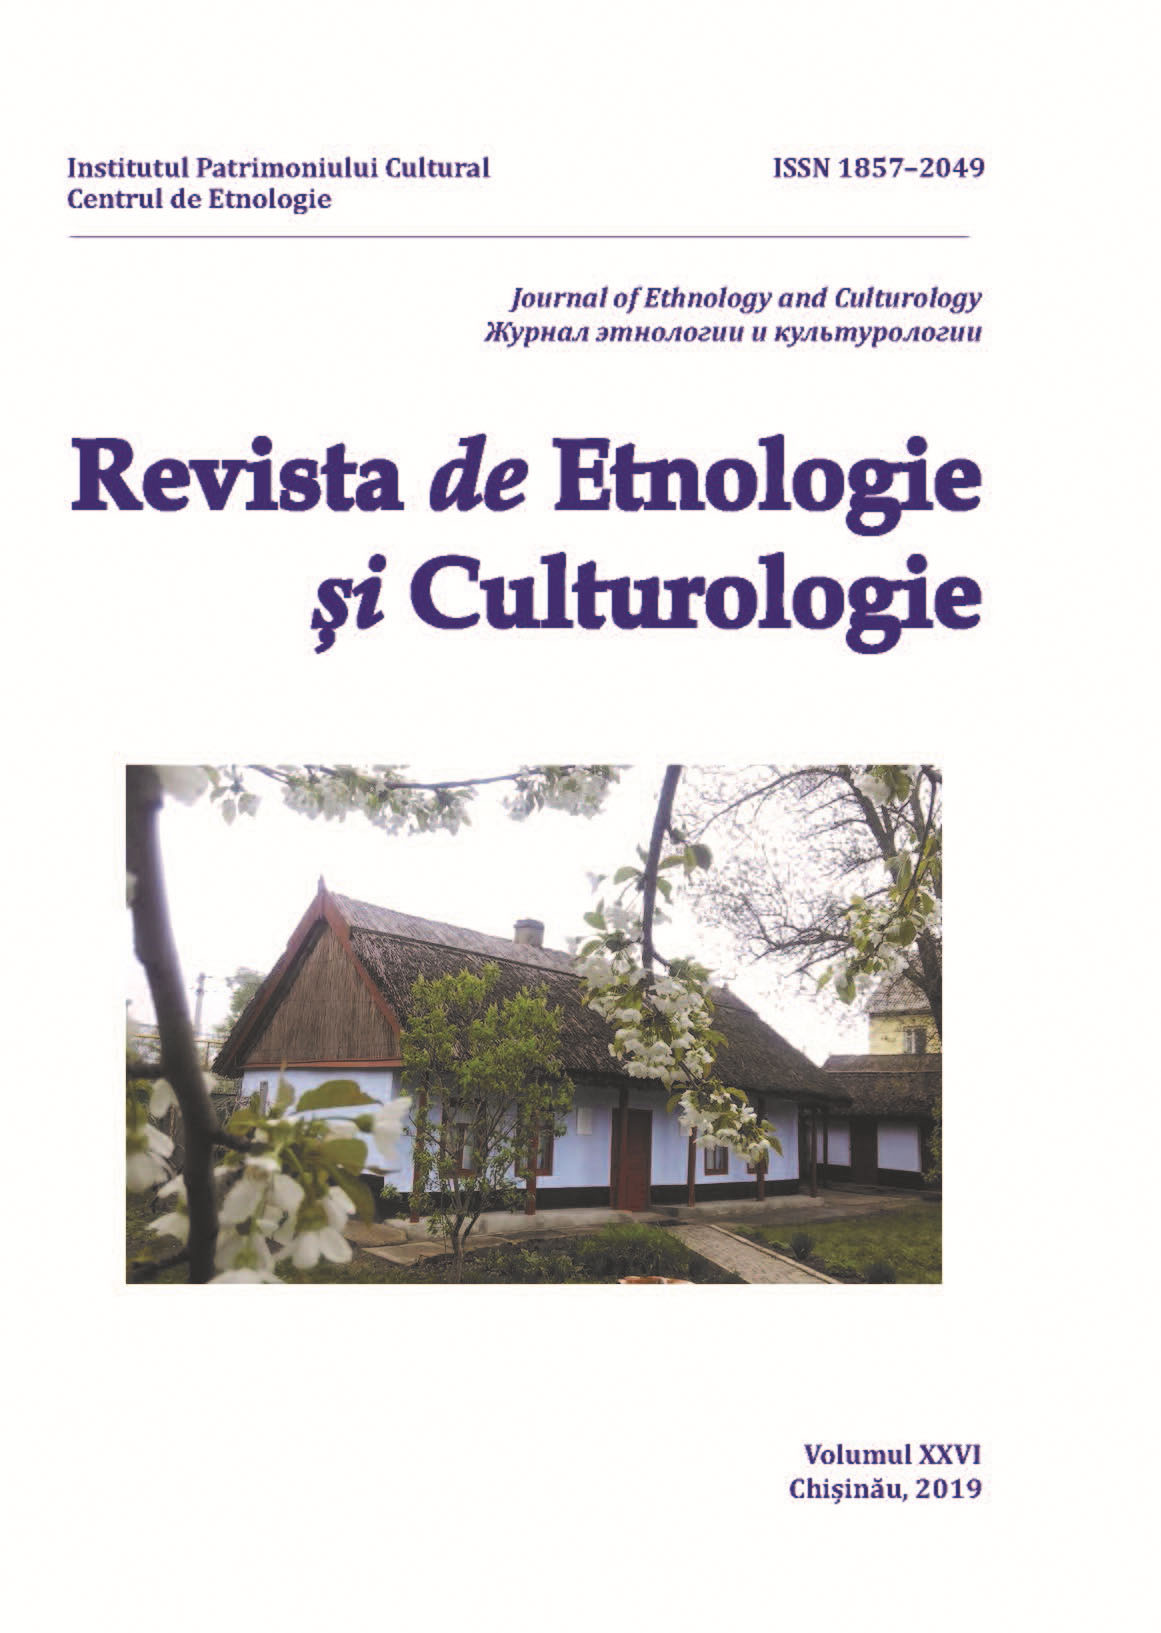 French ethnology: issues and priorities of contemporary ethnological research
(based on recent publications in the „Etnologie de la
France” collection) (II) Cover Image